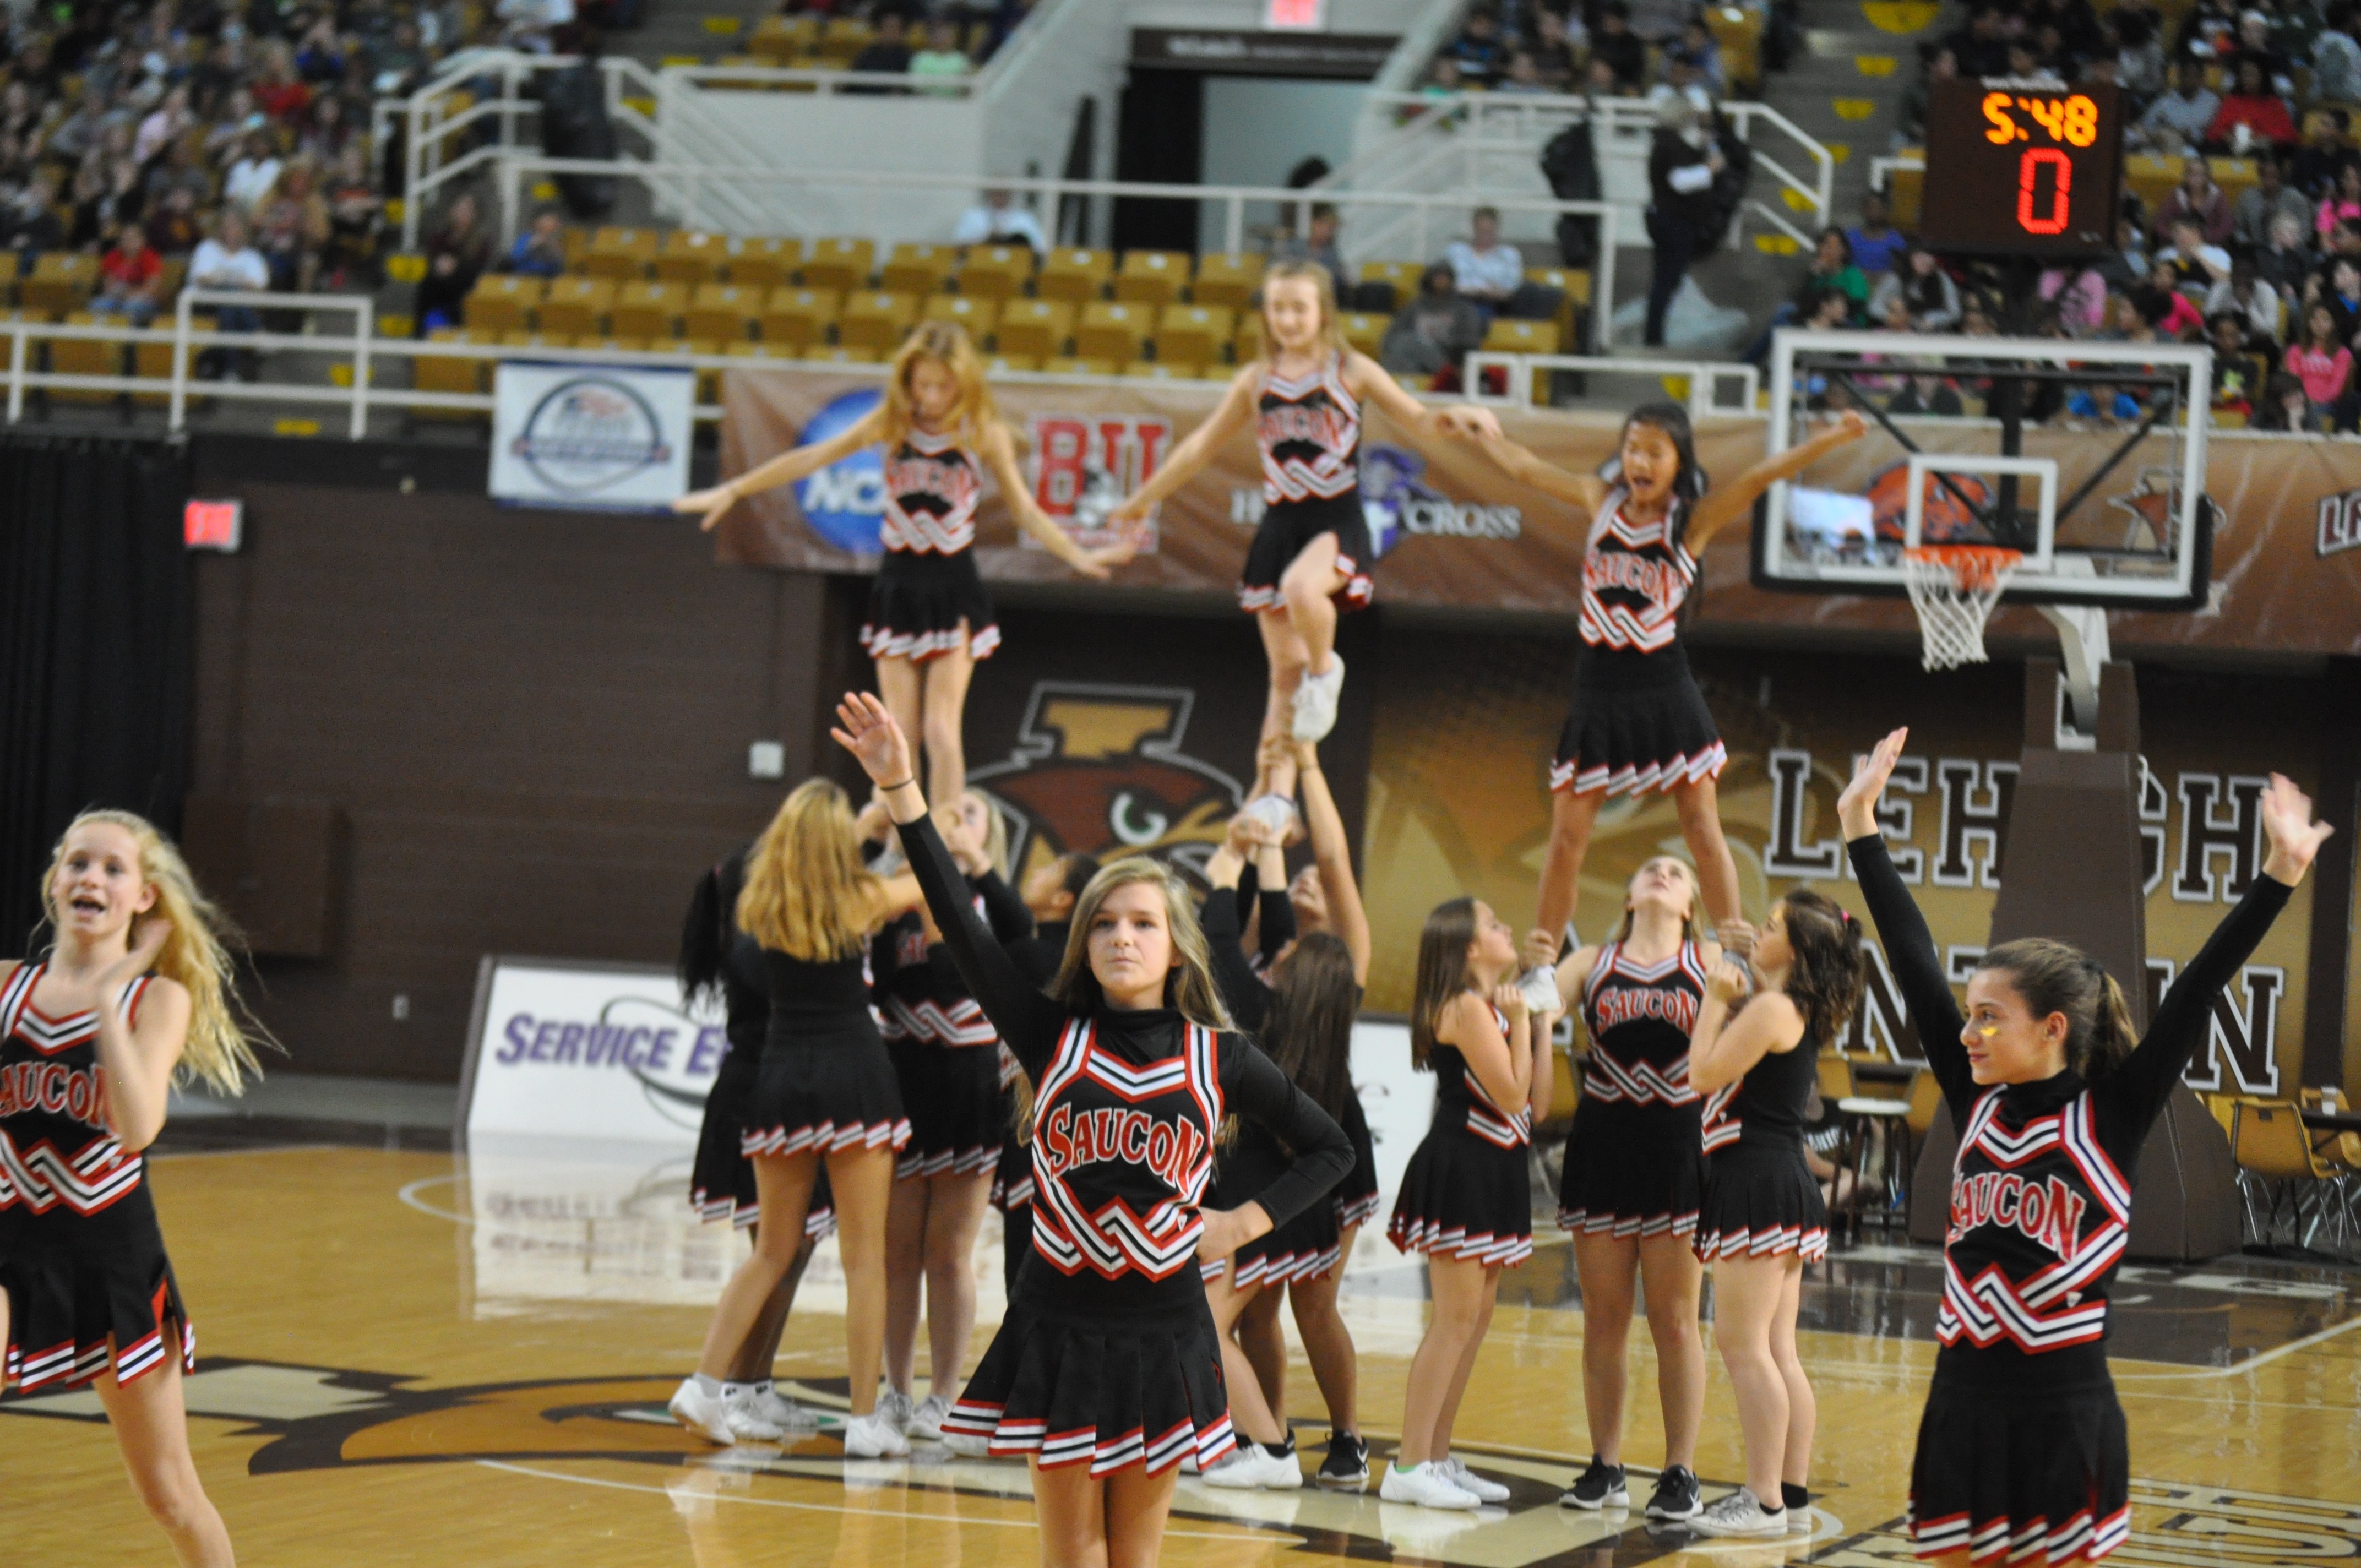 The SVMS cheerleaders during a break in the action.